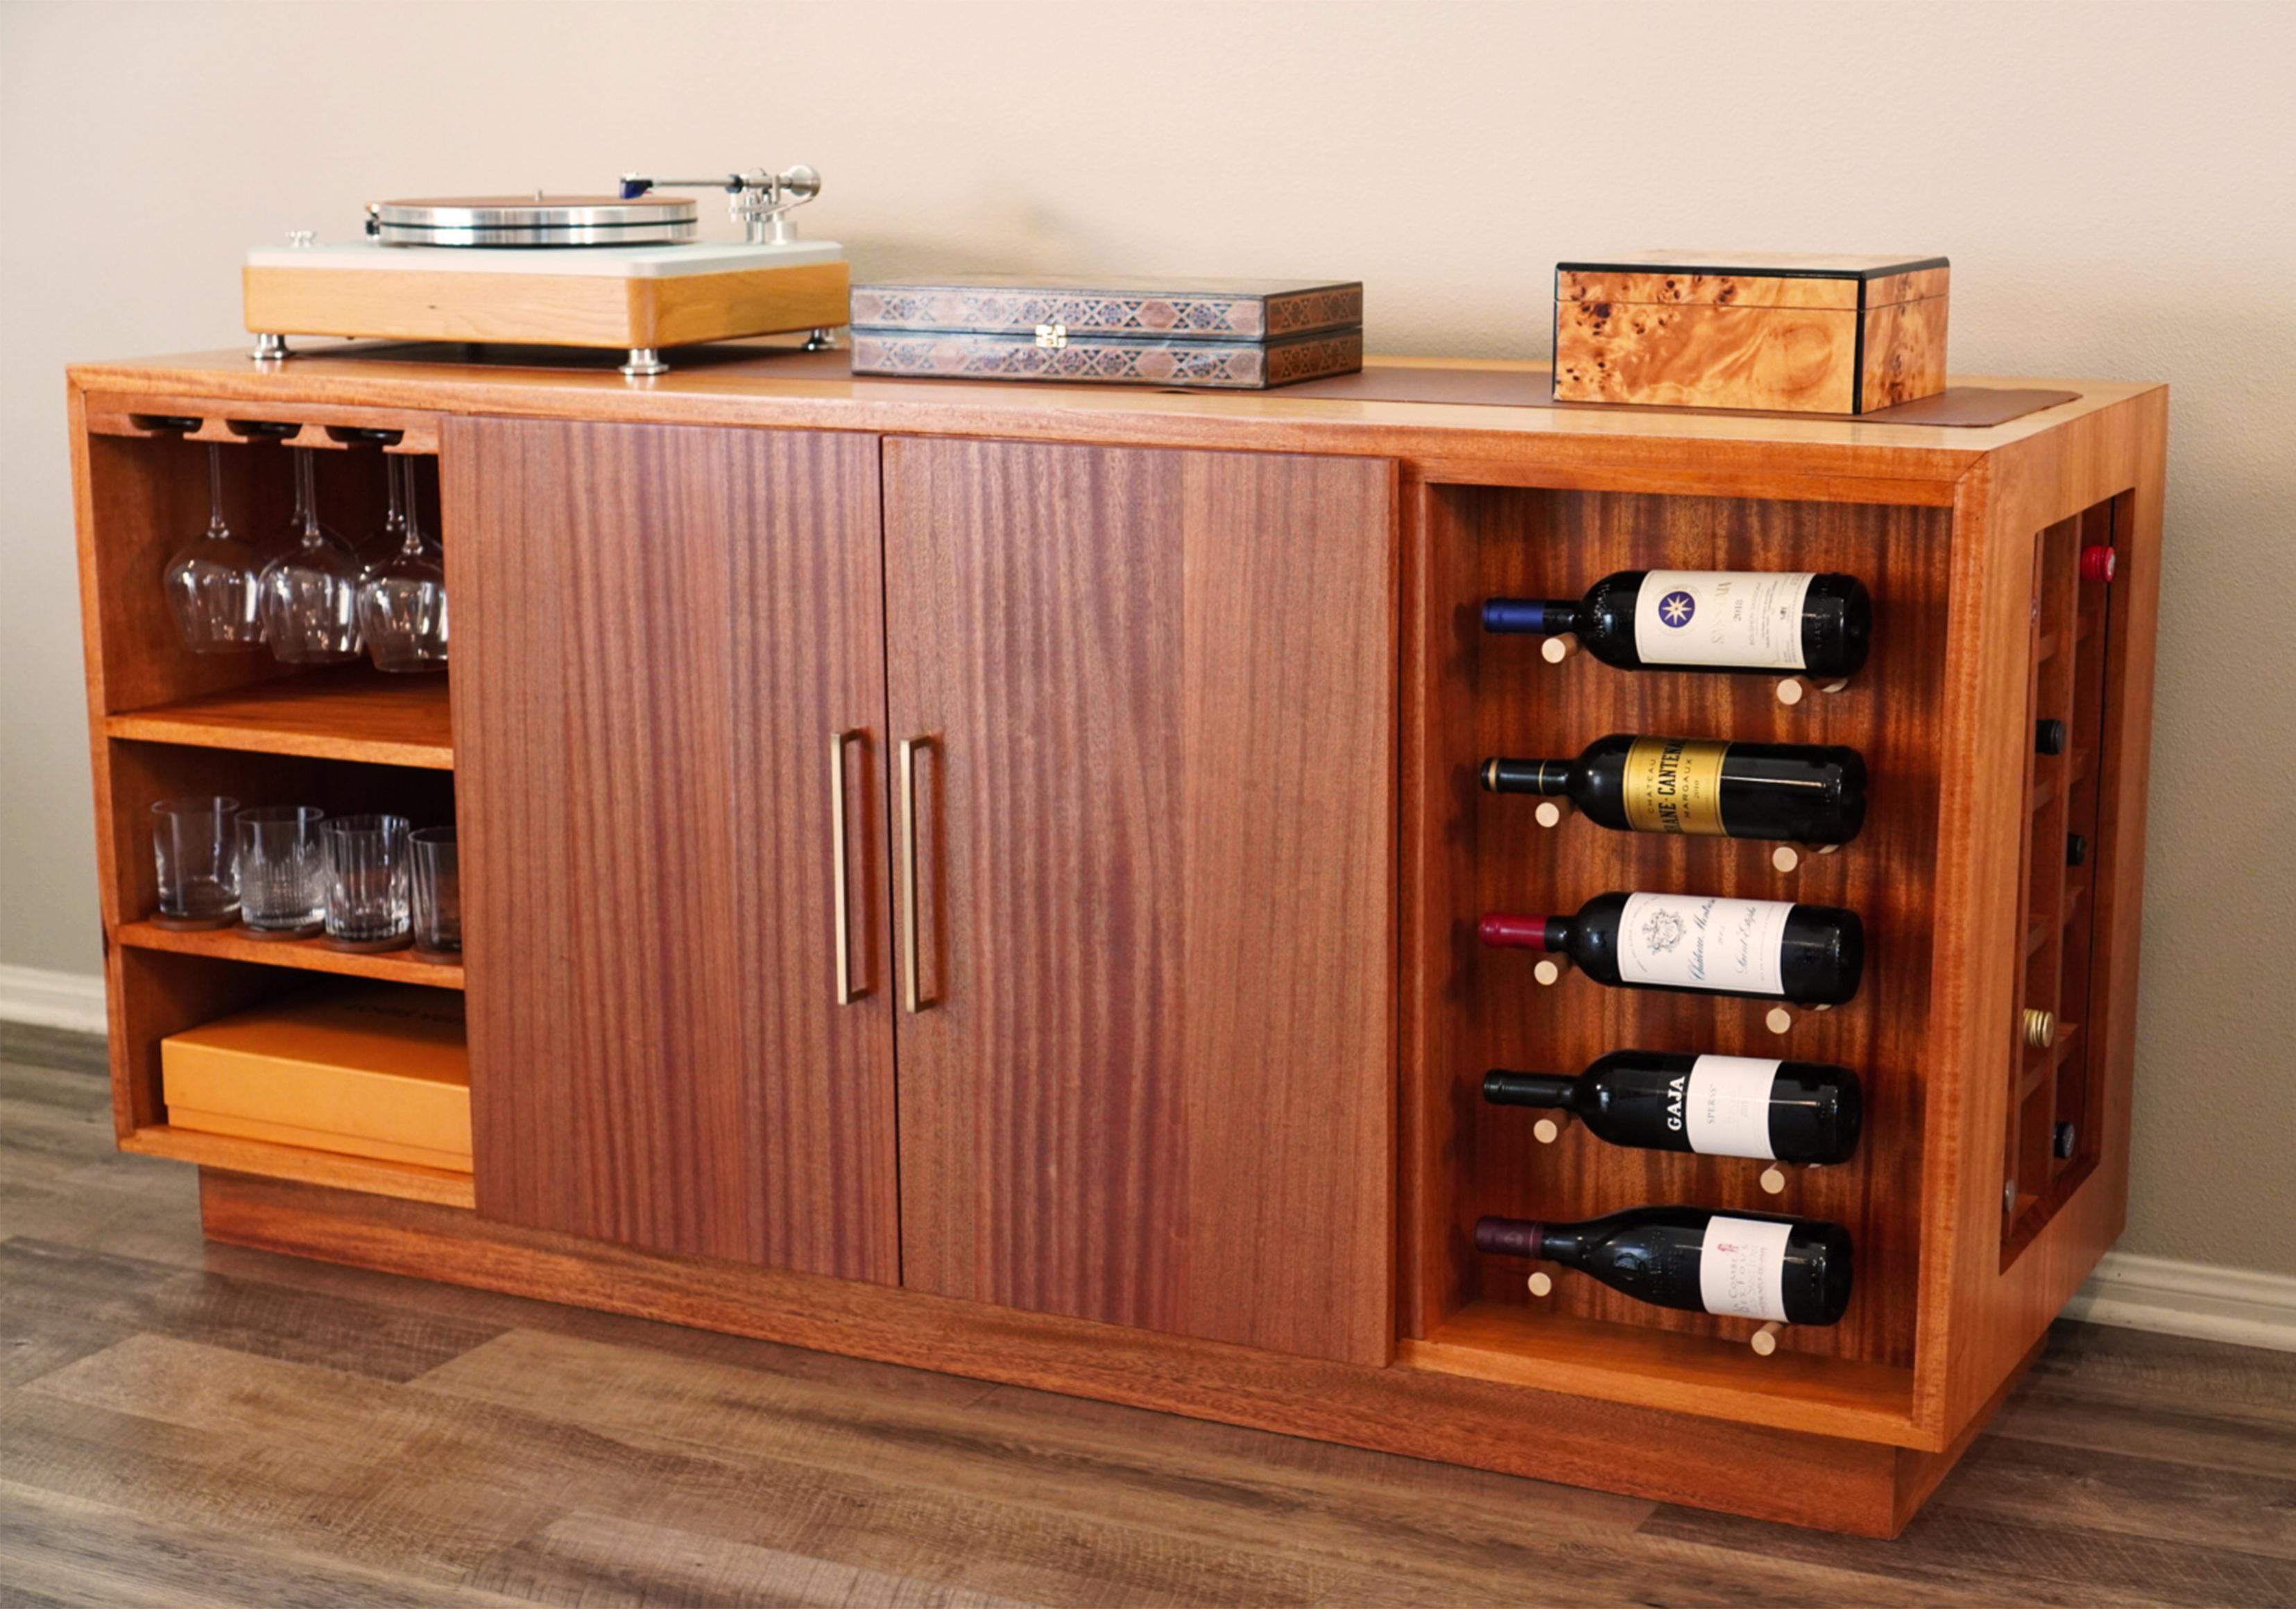 Welcome to Walker Design Studios, where Mid-Century Modern meets timeless craftsmanship. Our Sapele Sideboard Wine and Liquor Cabinet from the Made to Order Collection embodies elegance and functionality, seamlessly blending natural beauty with